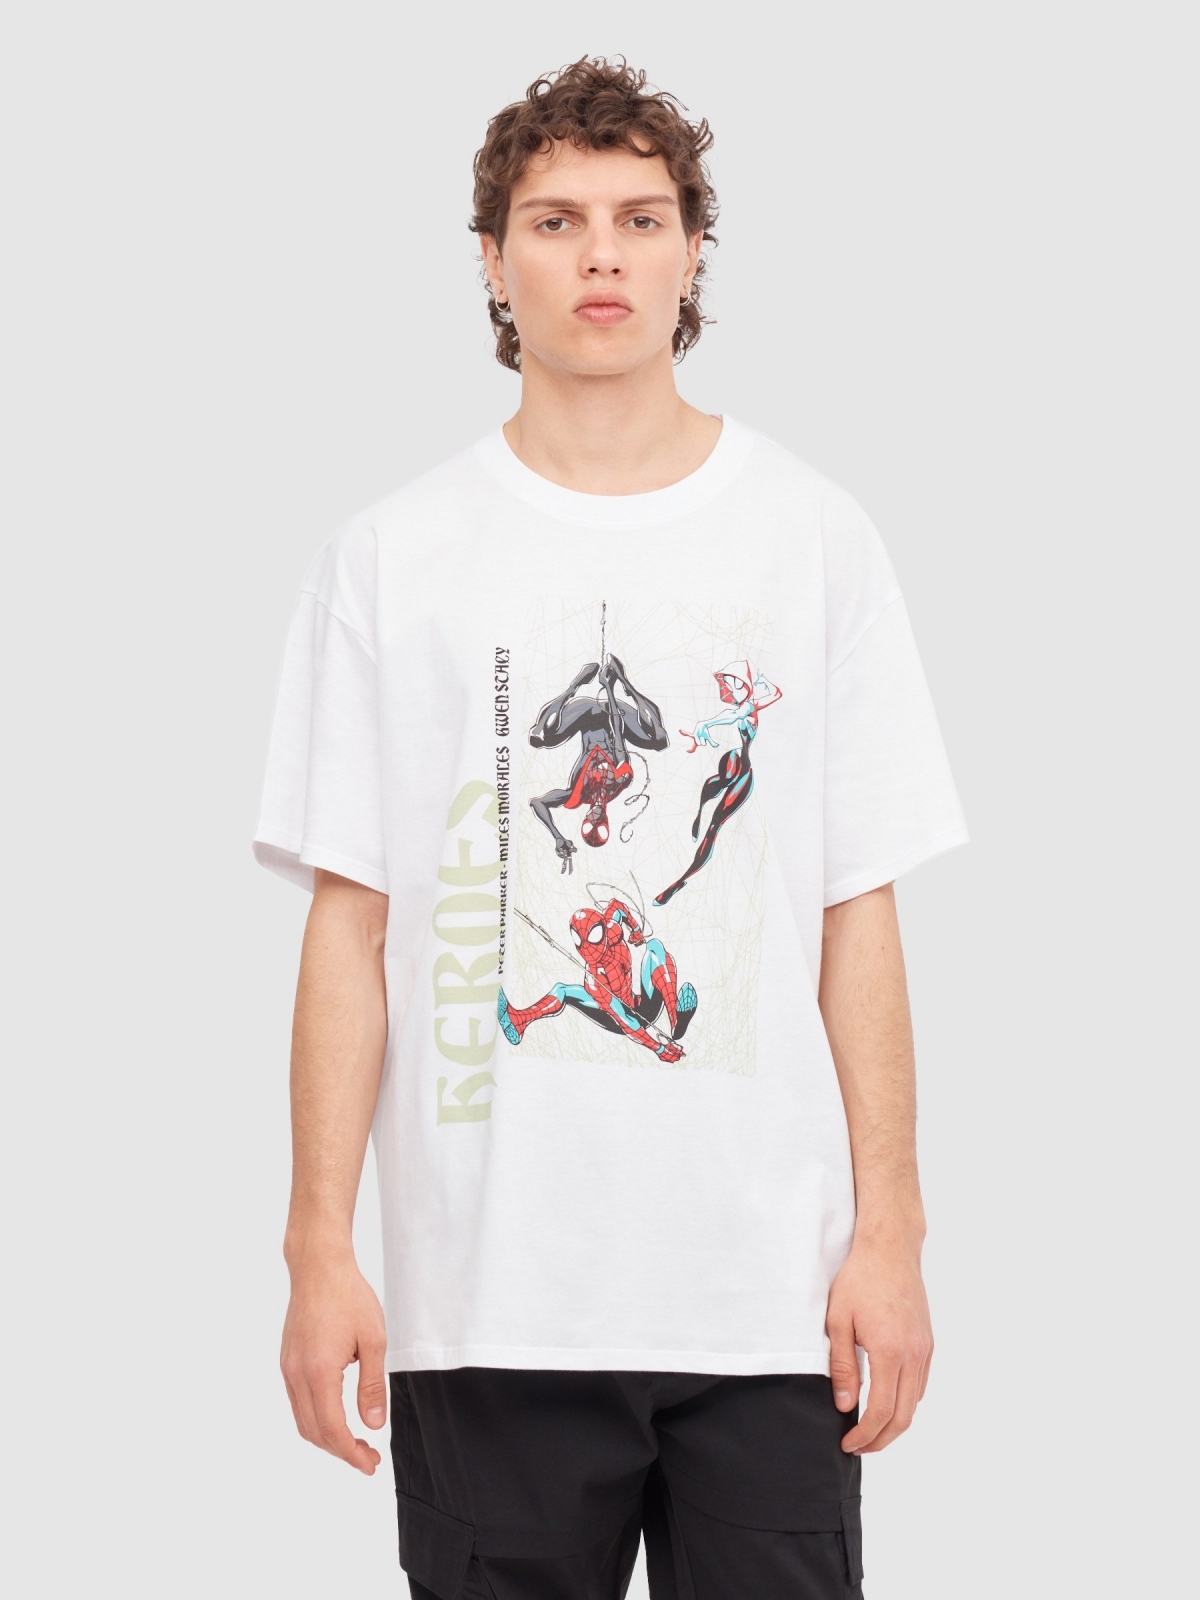 Spiderman Heroes T-shirt white middle front view